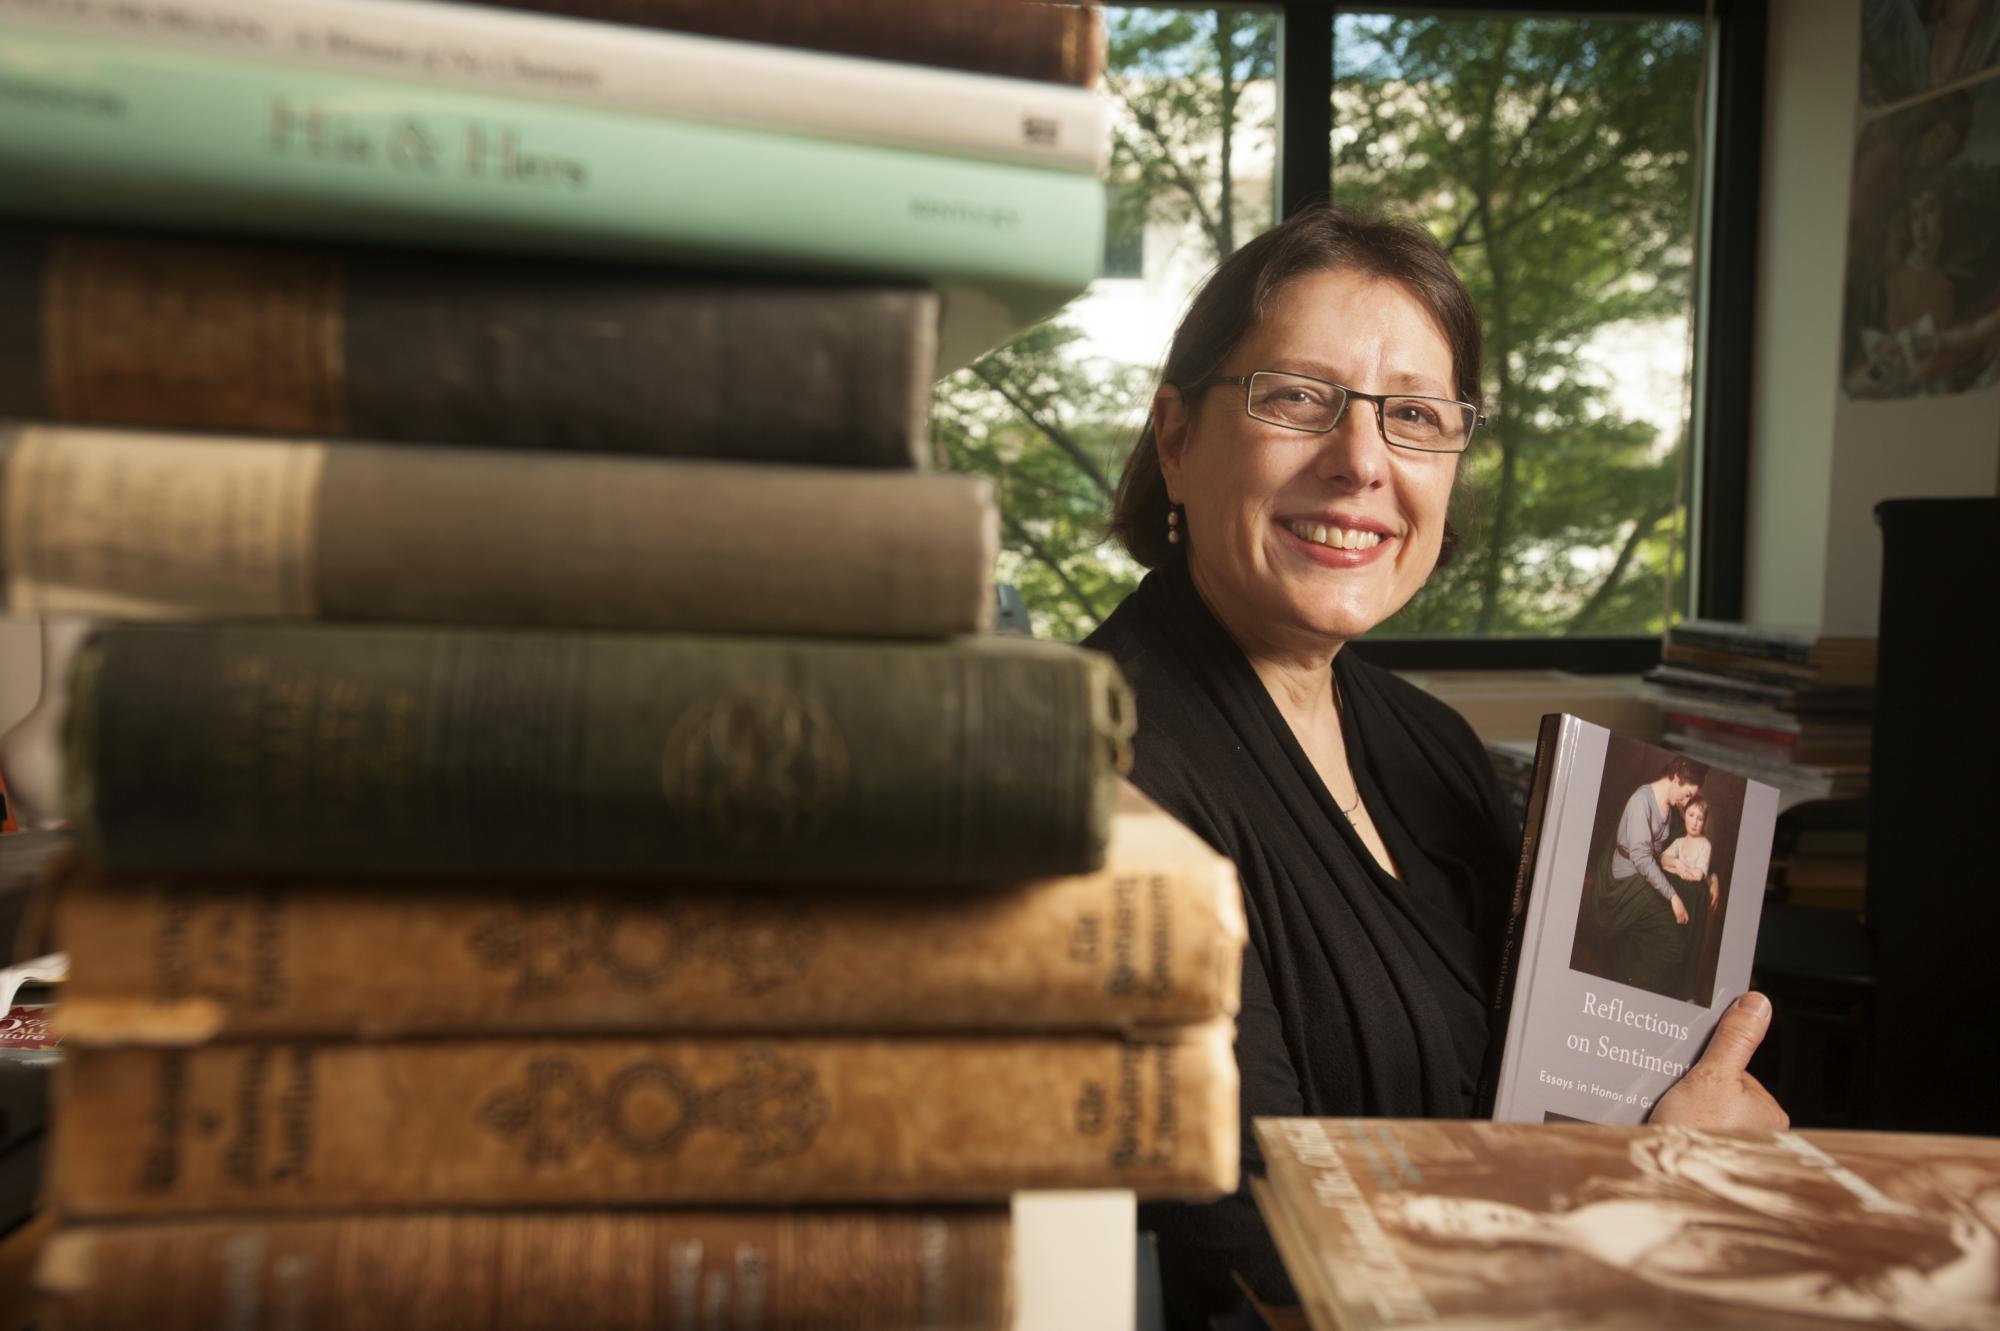 A female professor is pictured with a stack of books in the foreground